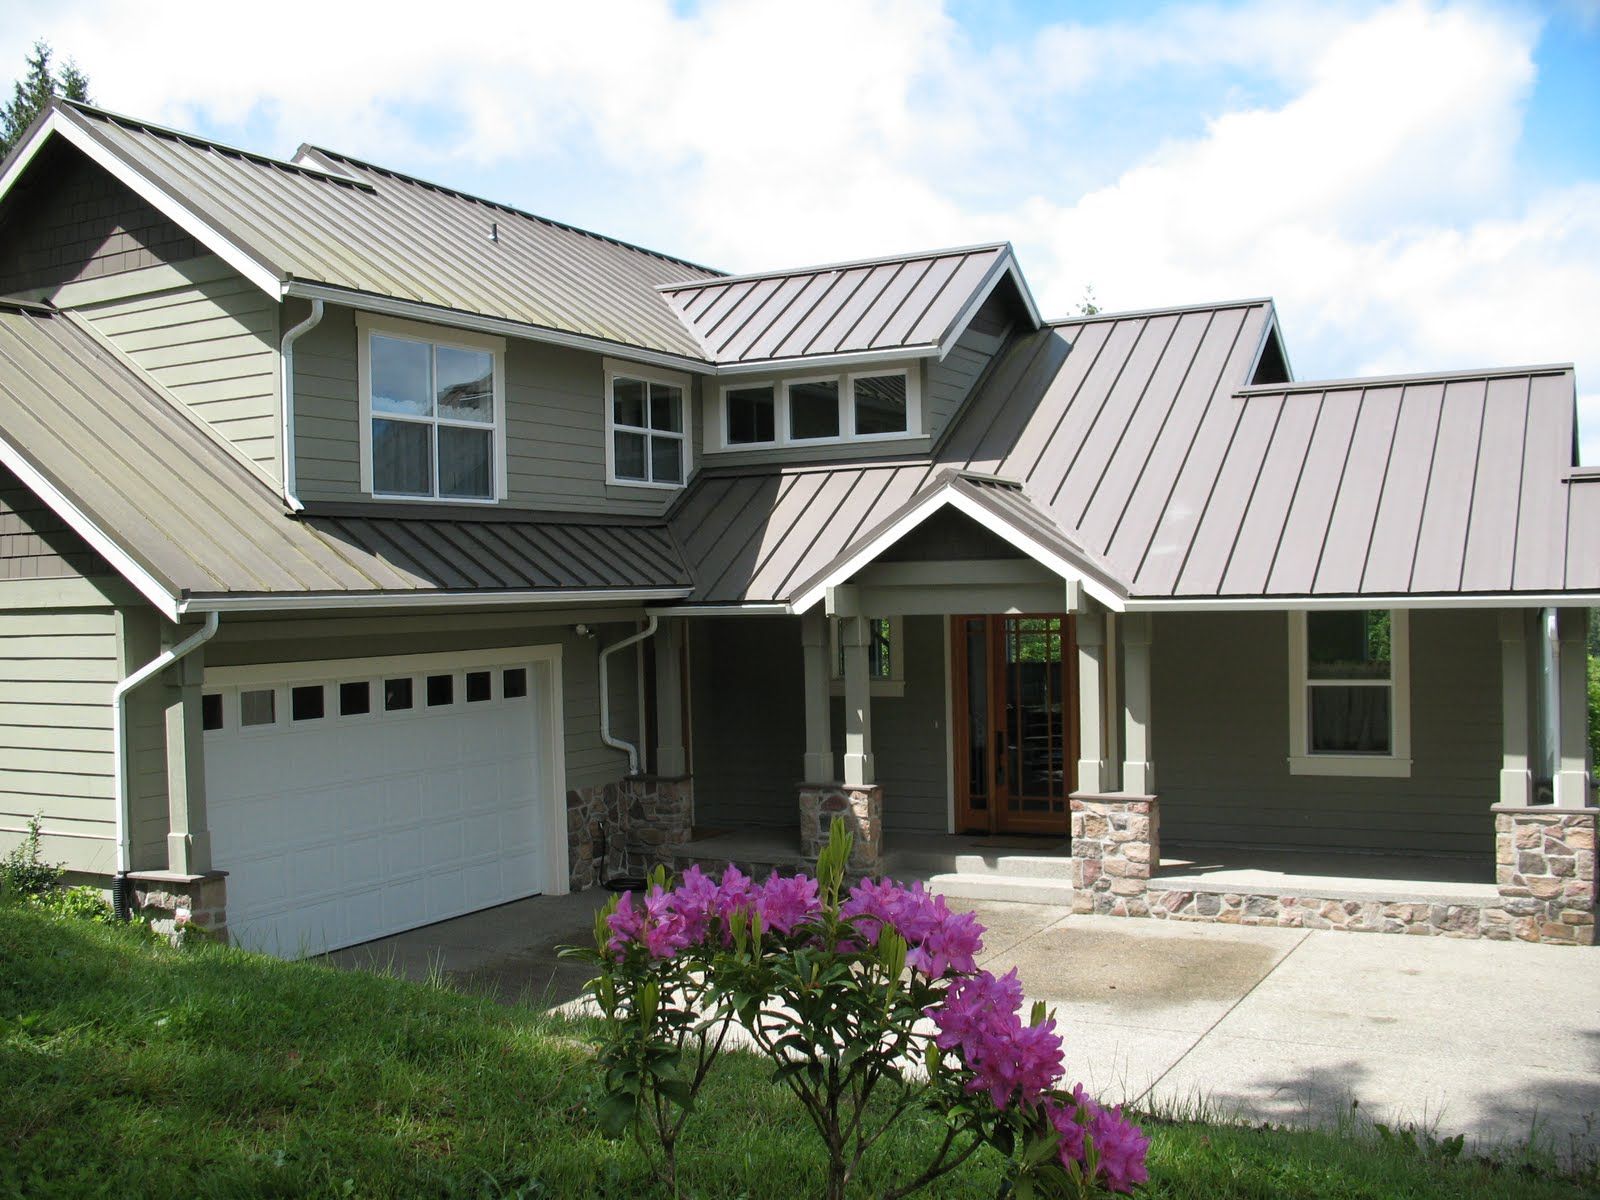 House with a metal roof